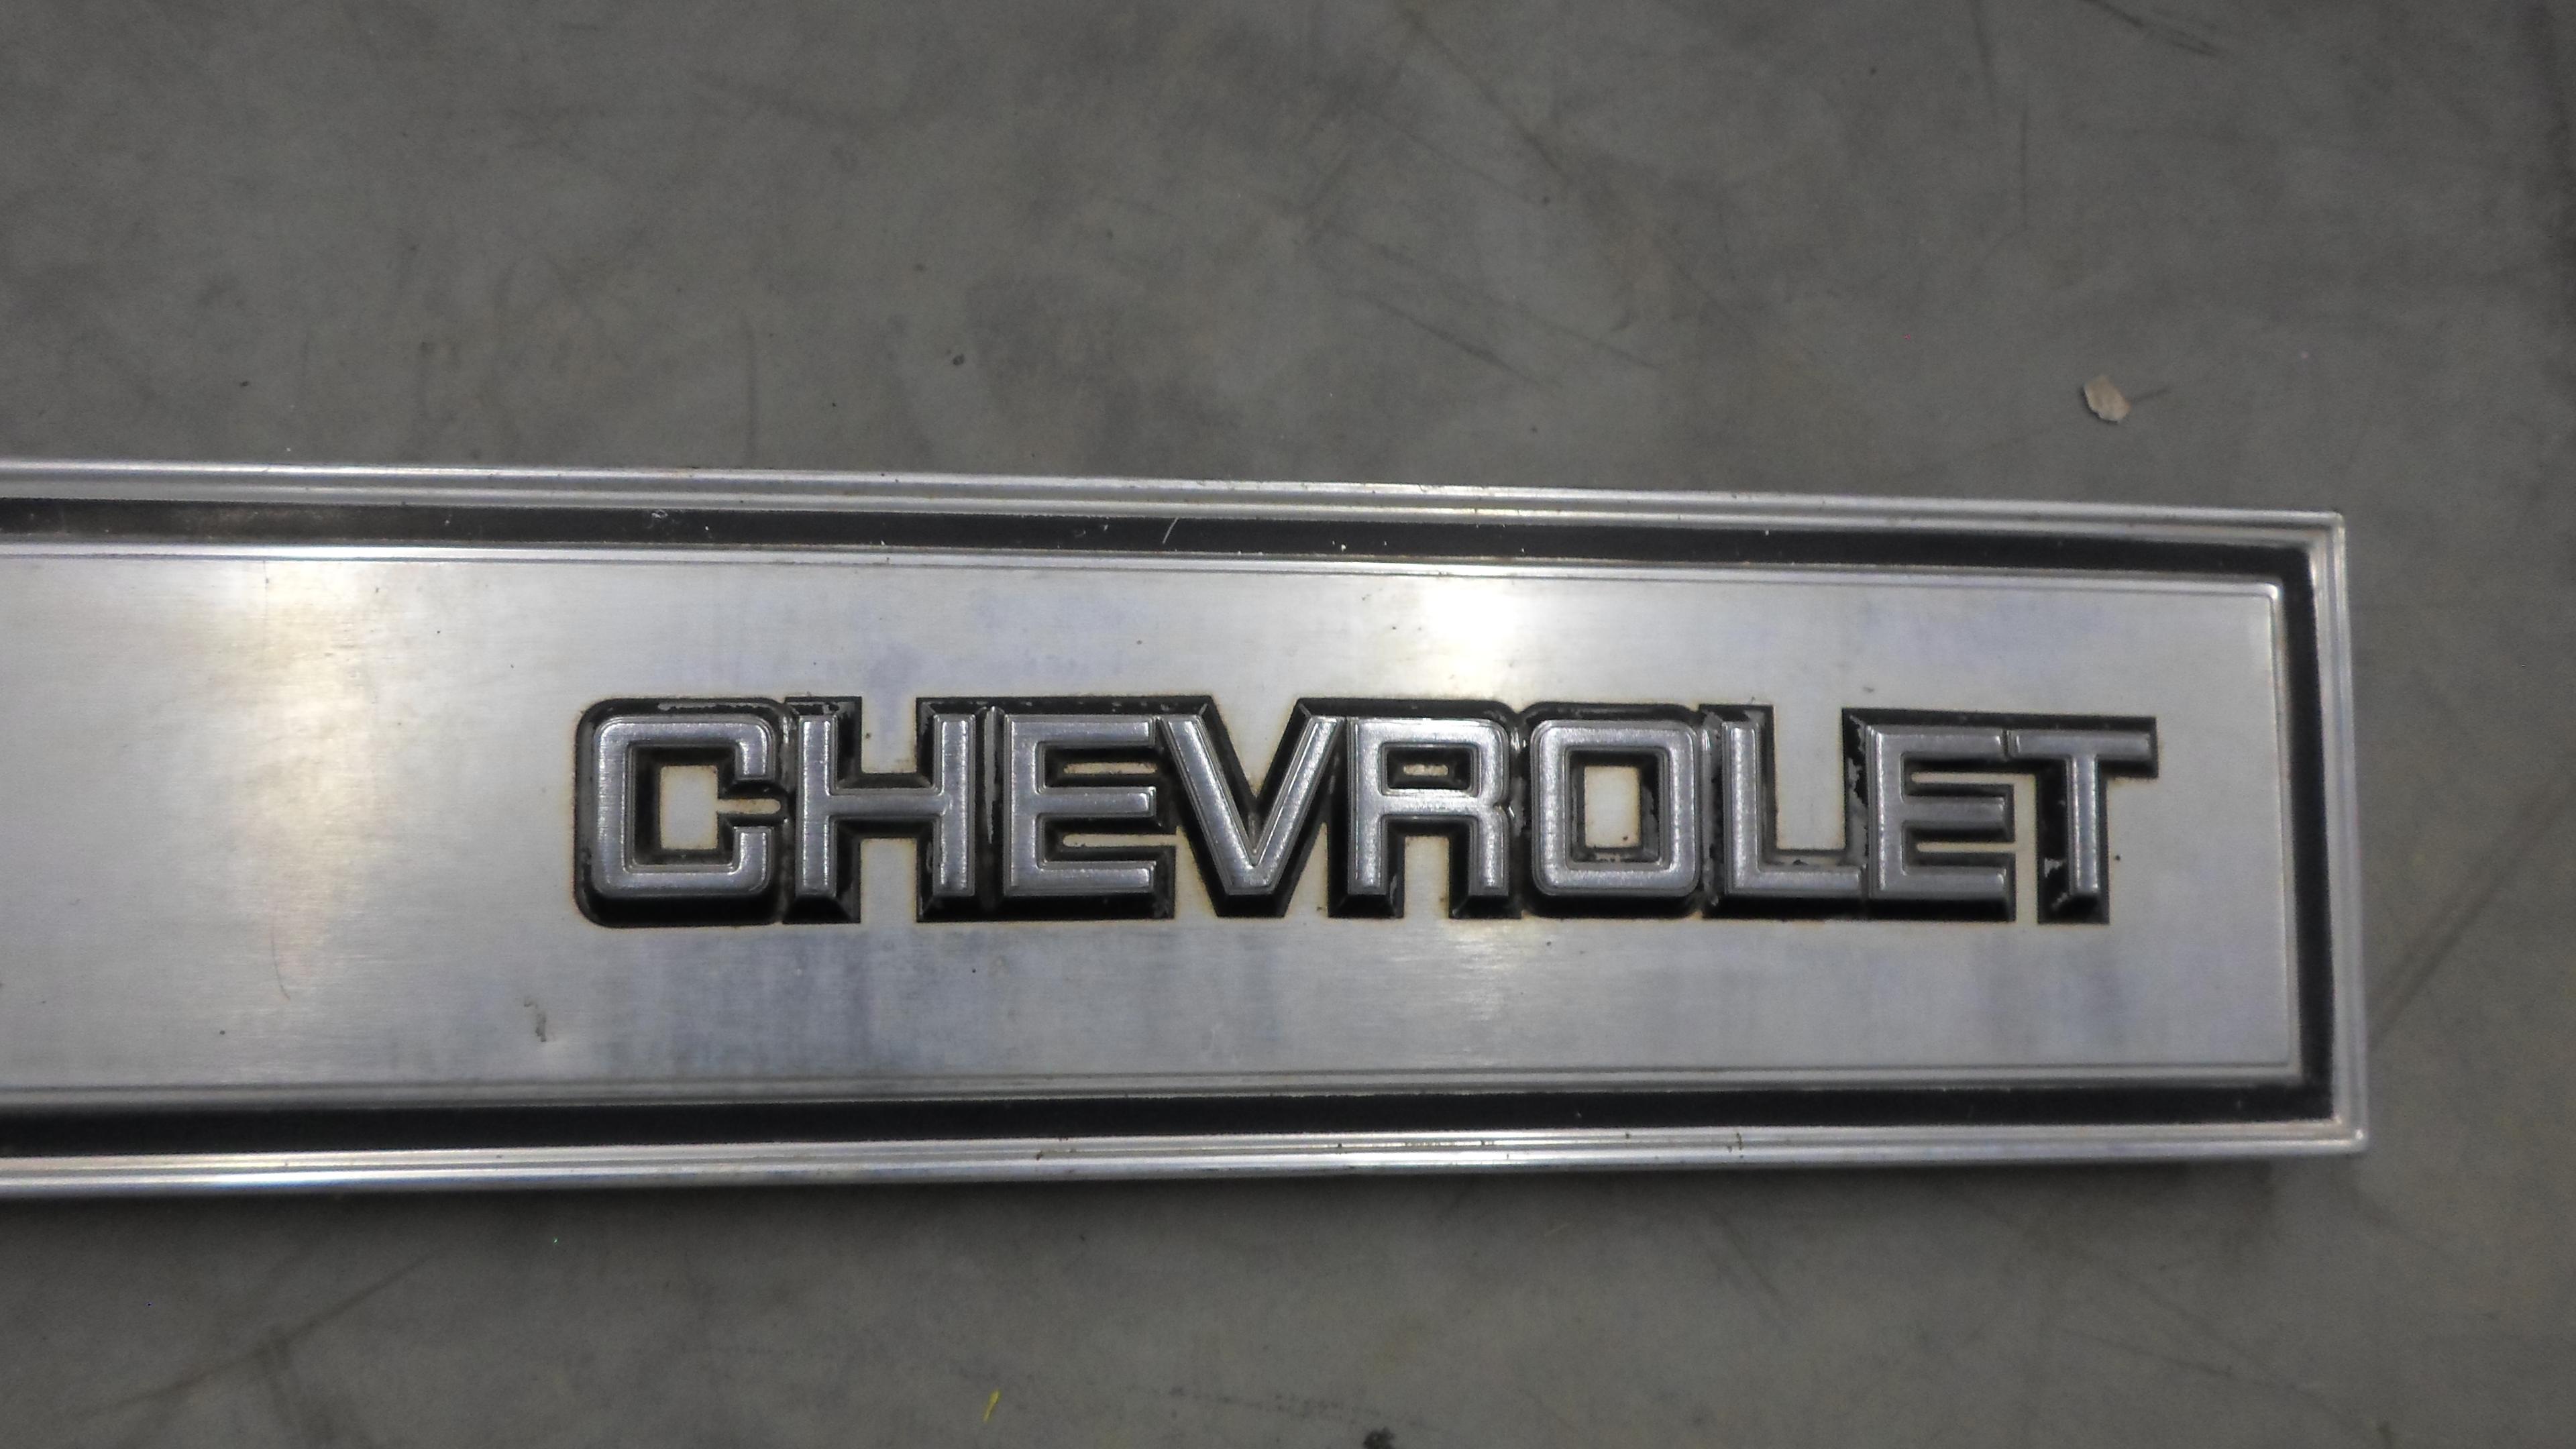 chevy car part, vintage chevrolet tailgate section great for home decor or repair of a classic auto